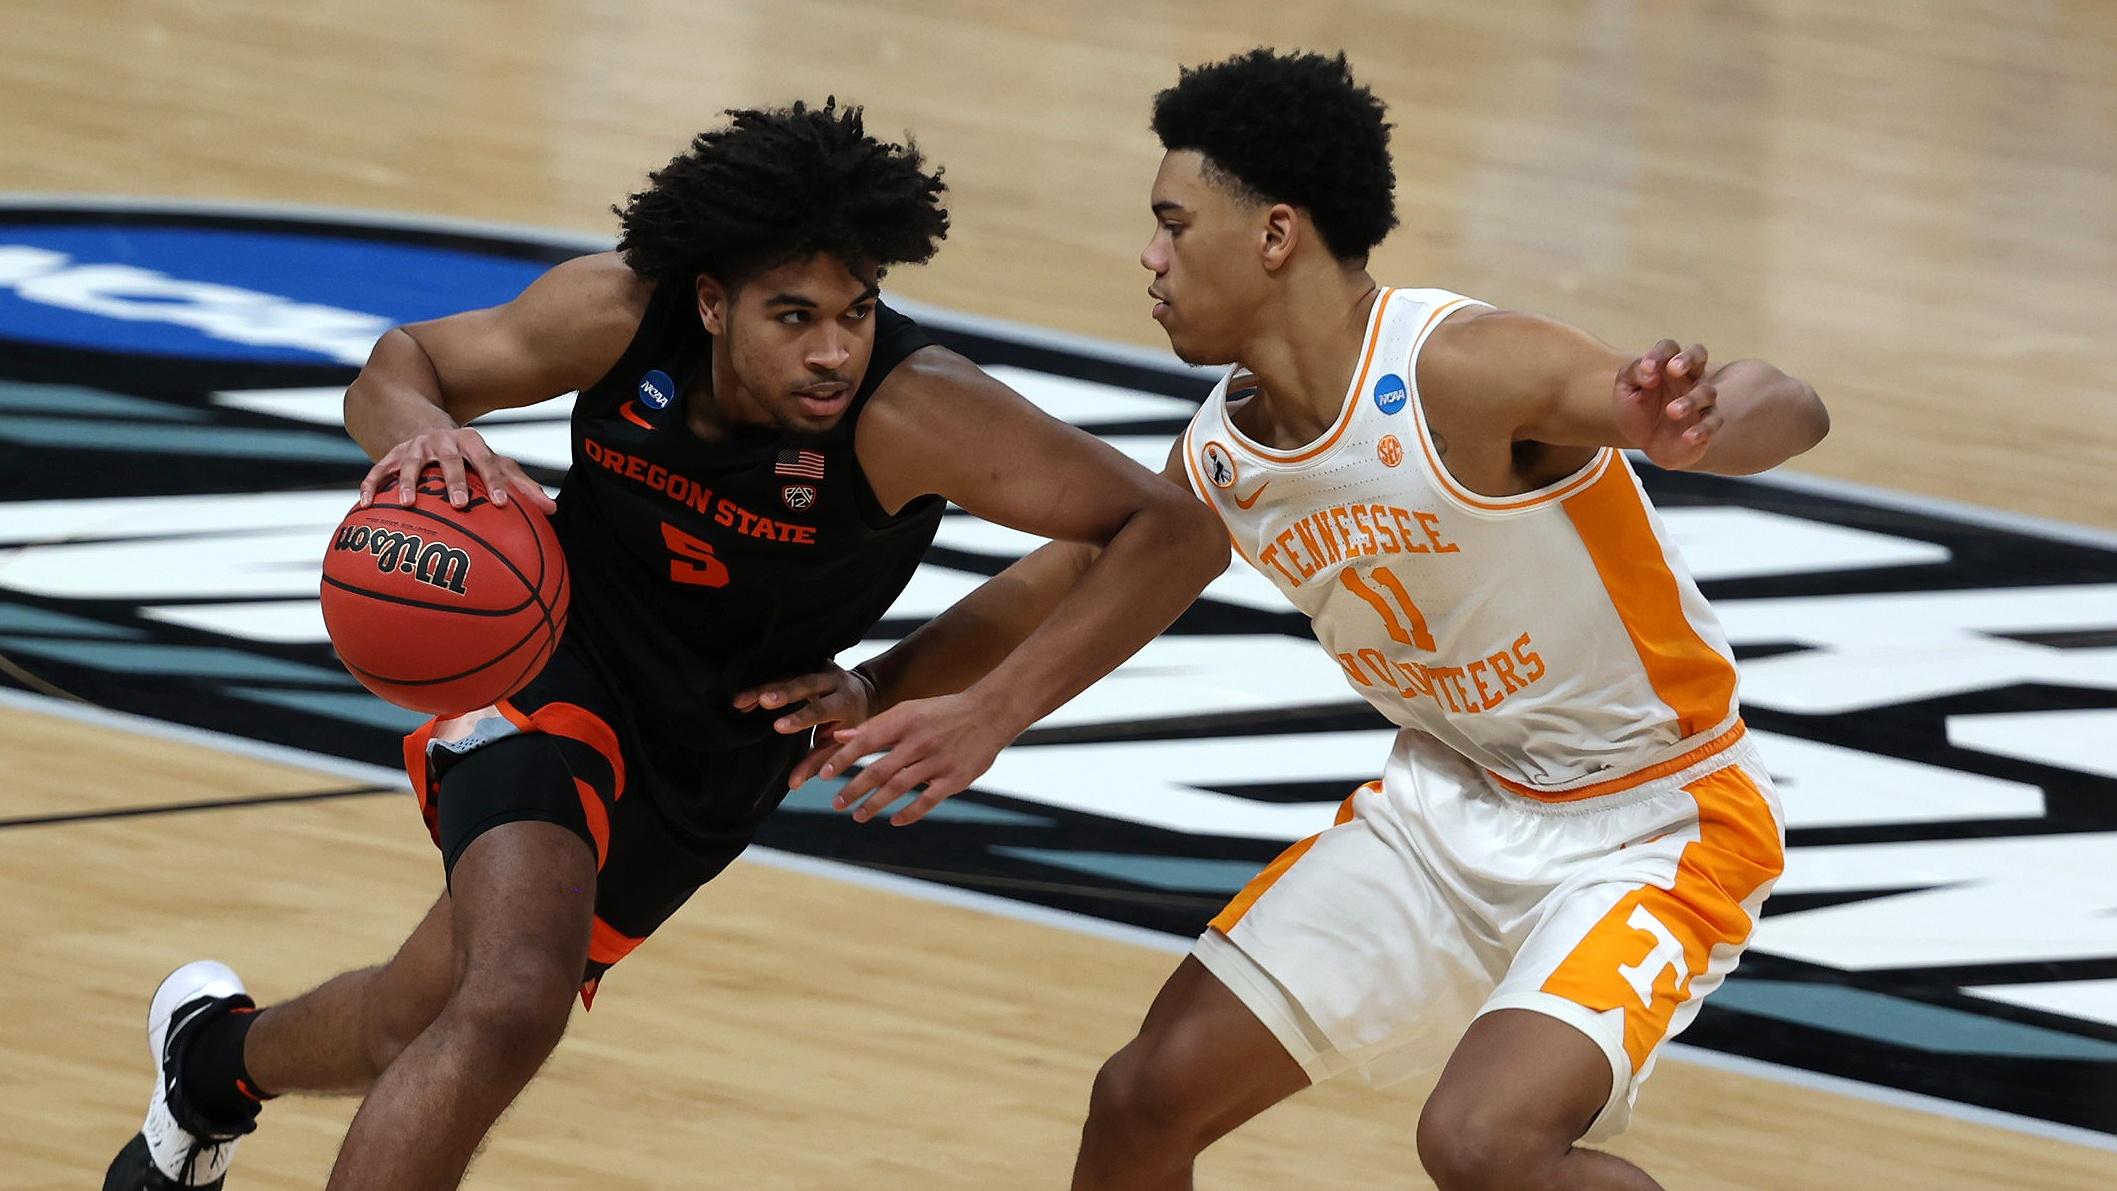 Mar 19, 2021; Indianapolis, Indiana, USA; Oregon State Beavers guard Ethan Thompson (5) dribbles the ball while defended by Tennessee Volunteers guard Jaden Springer (11) during the second half in the first round of the 2021 NCAA Tournament at Bankers Life Fieldhouse. / © Trevor Ruszkowski-USA TODAY Sports